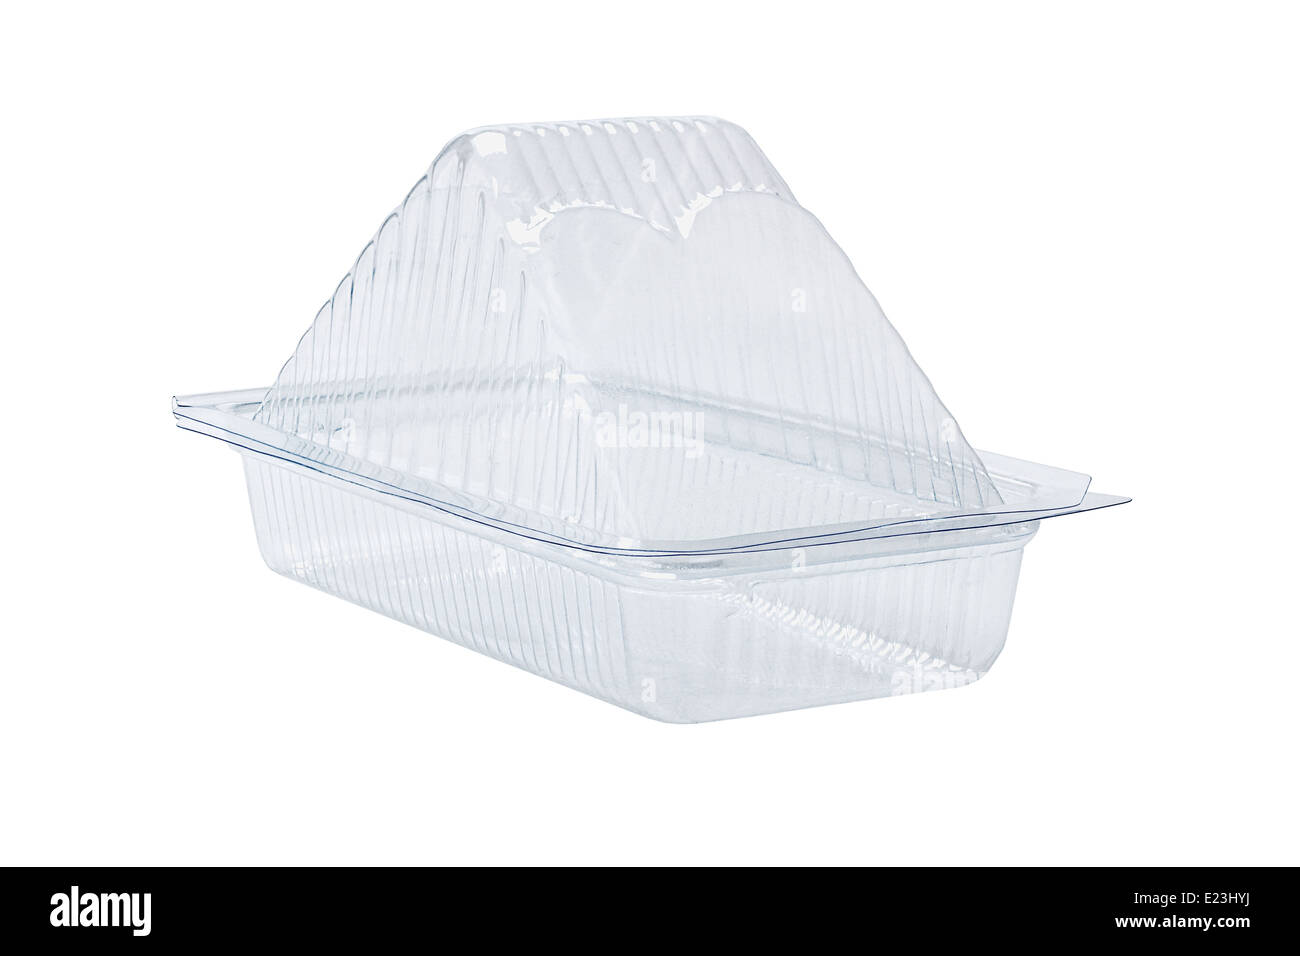 Plastic Sandwich Container On White Background Stock Photo